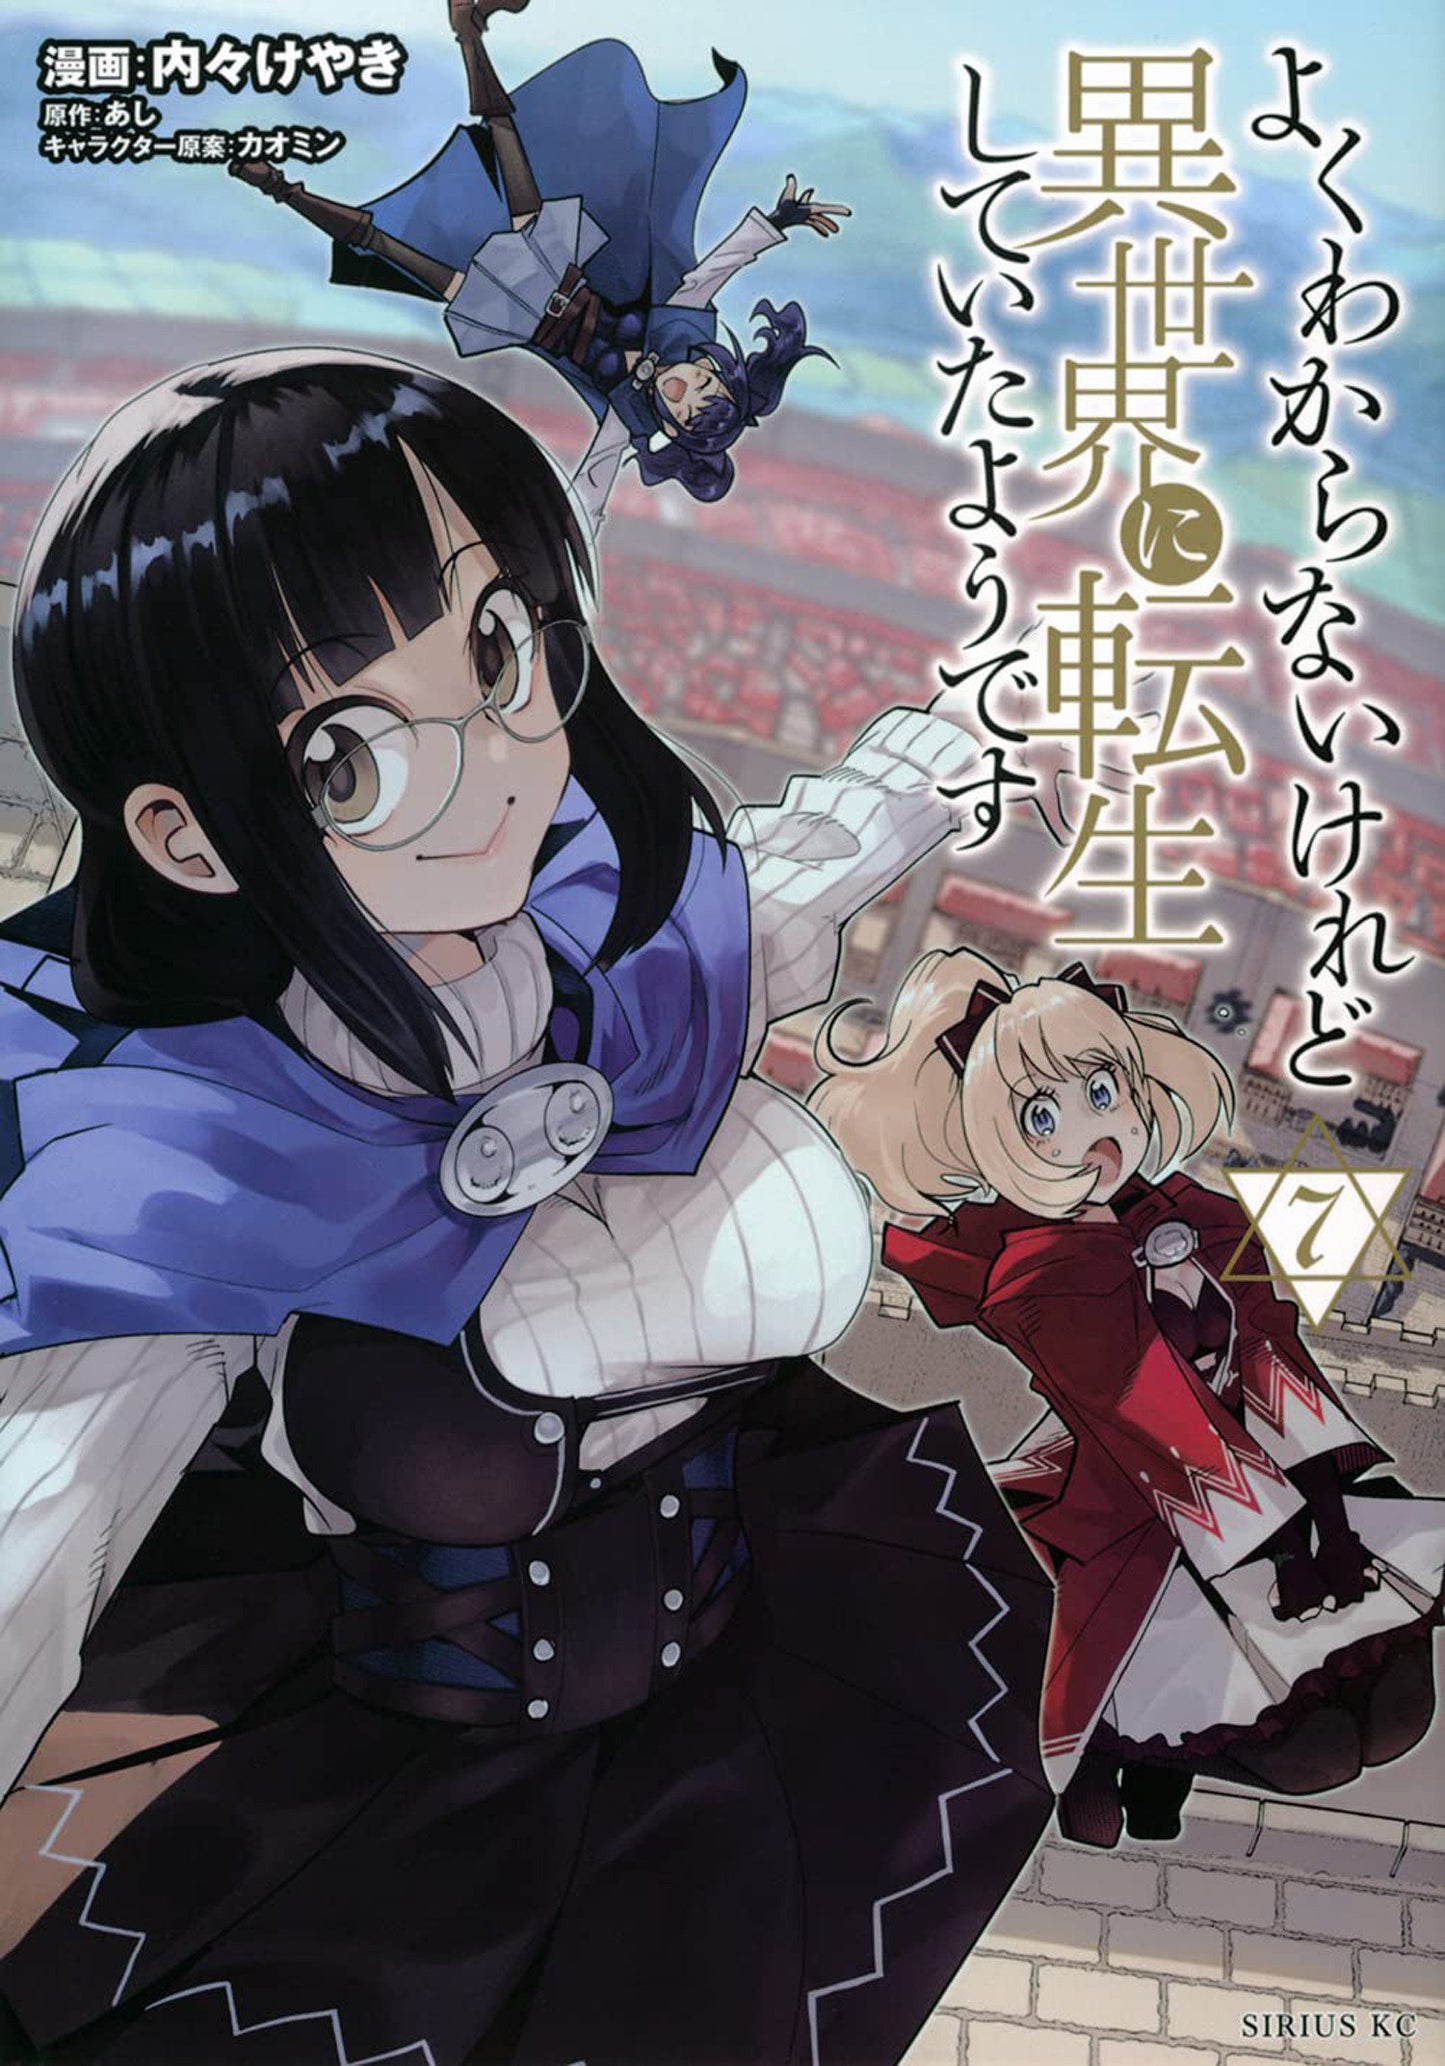 This Is Screwed Up, but I Was Reincarnated as a GIRL in Another World! (Manga) Vol. 7